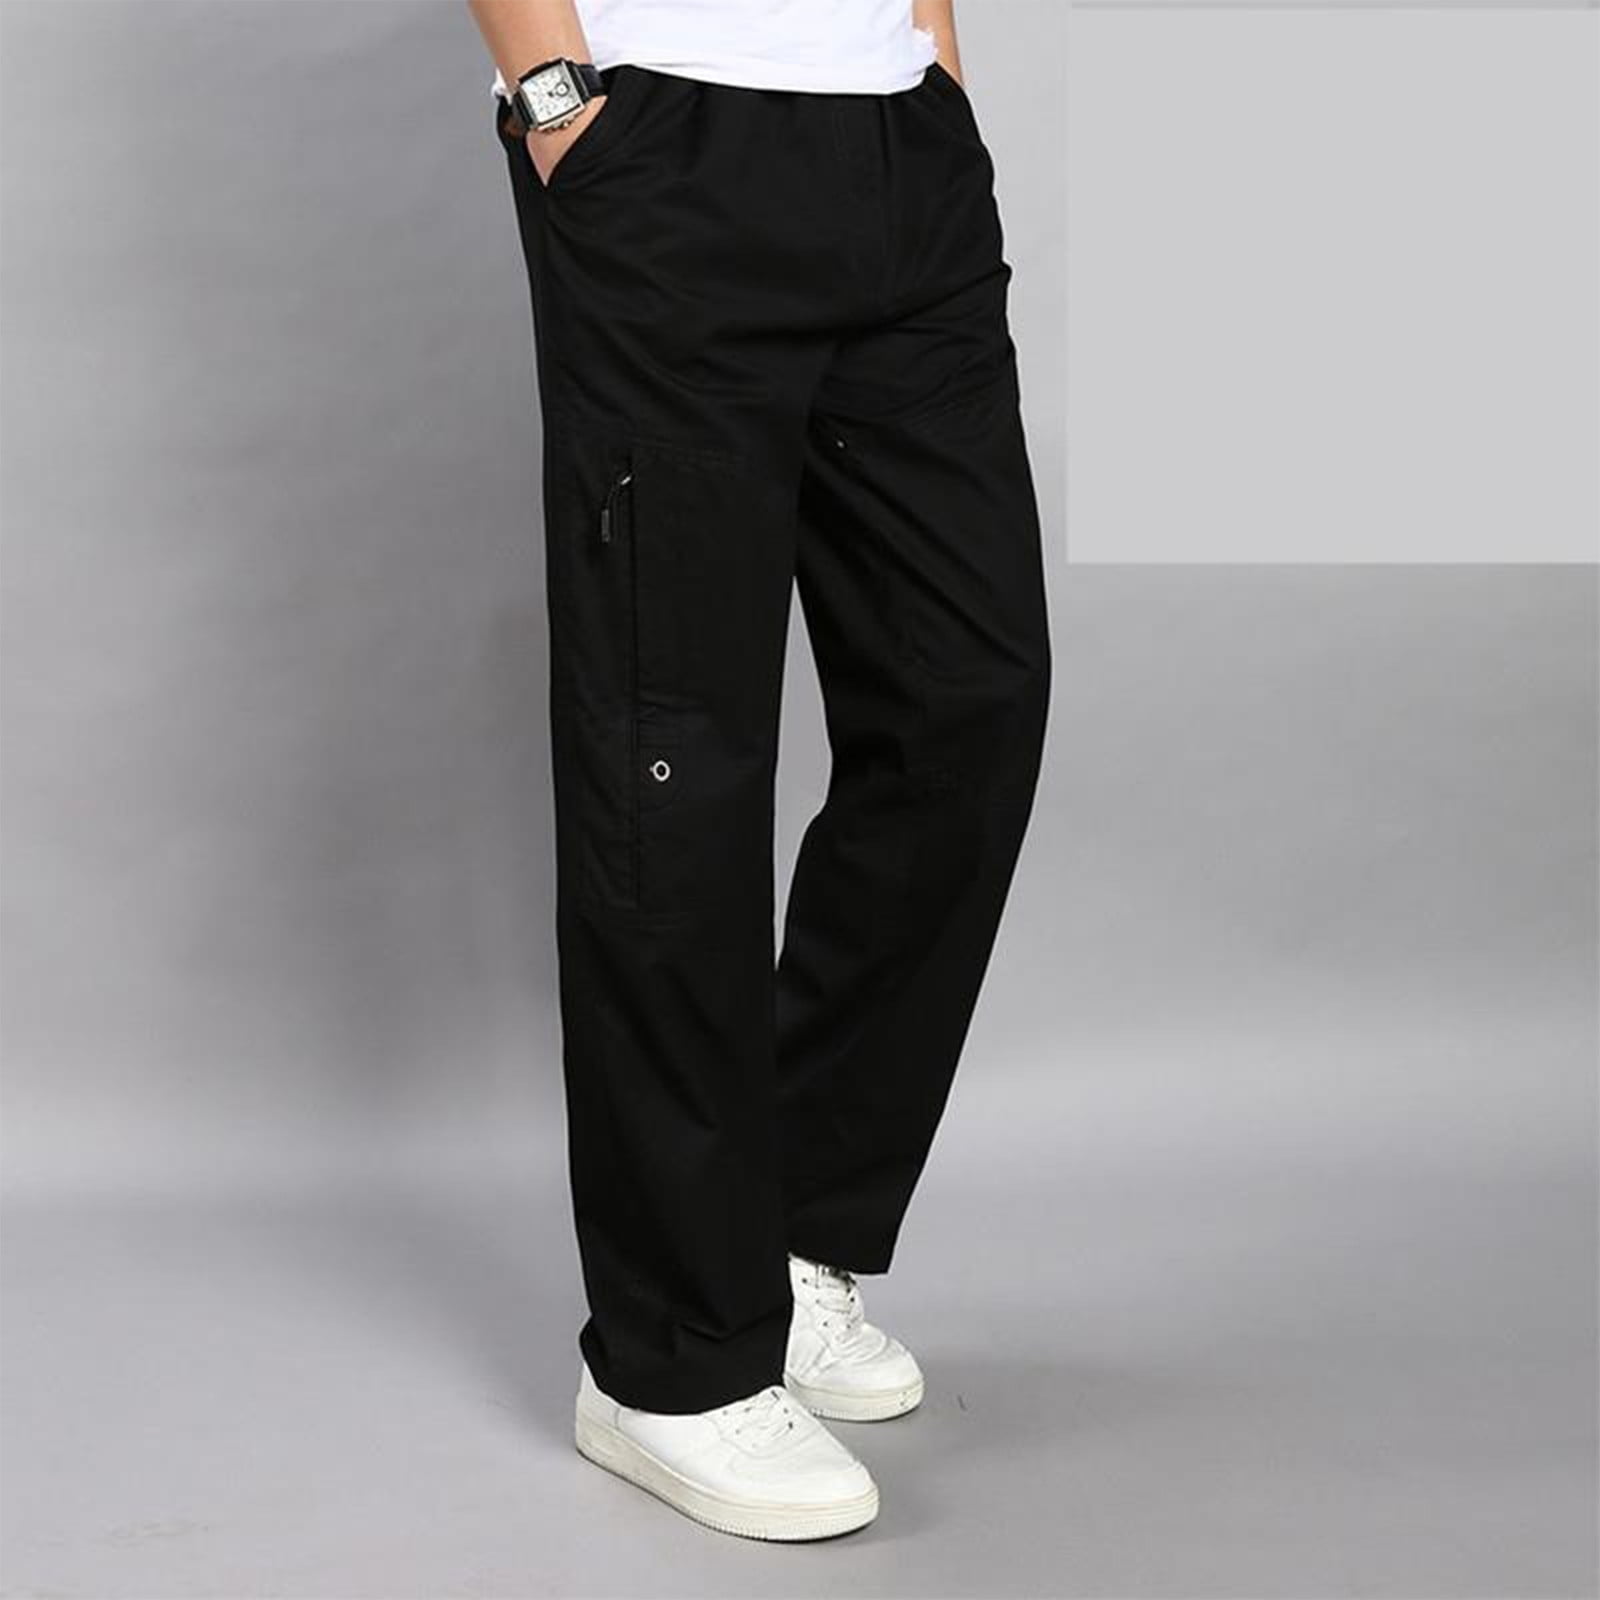 Men's Cargo Sweatpants Open Bottom Straight Leg Casual Loose Fit Baggy  Athletic Jogger Pants with Pockets M-5XL 